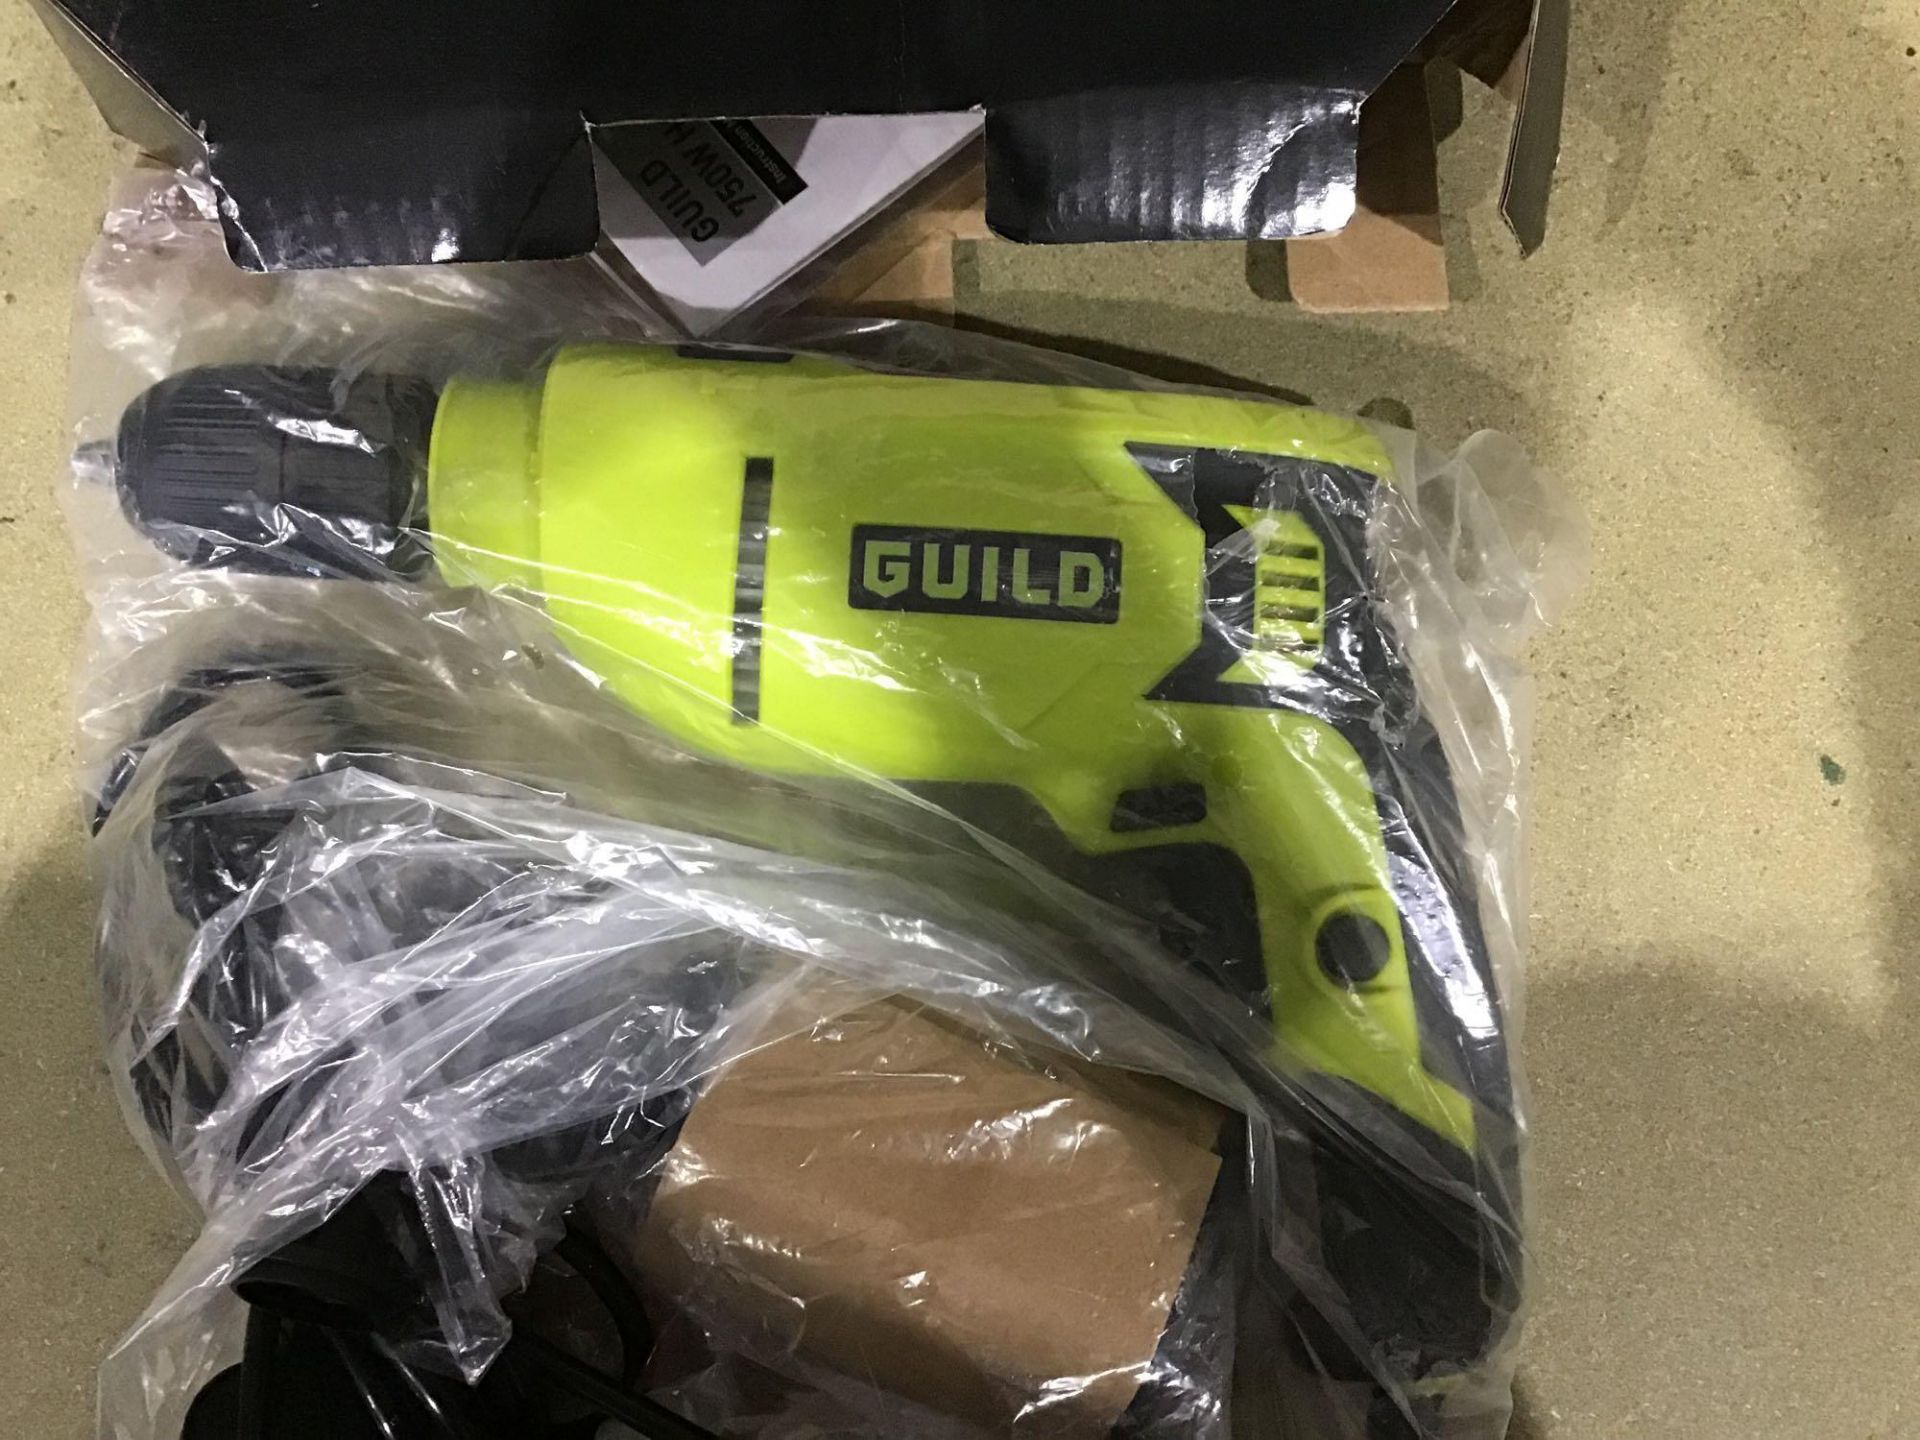 Guild 13mm Keyless High Power Corded Hammer Drill – 750W - £30.00 RRP